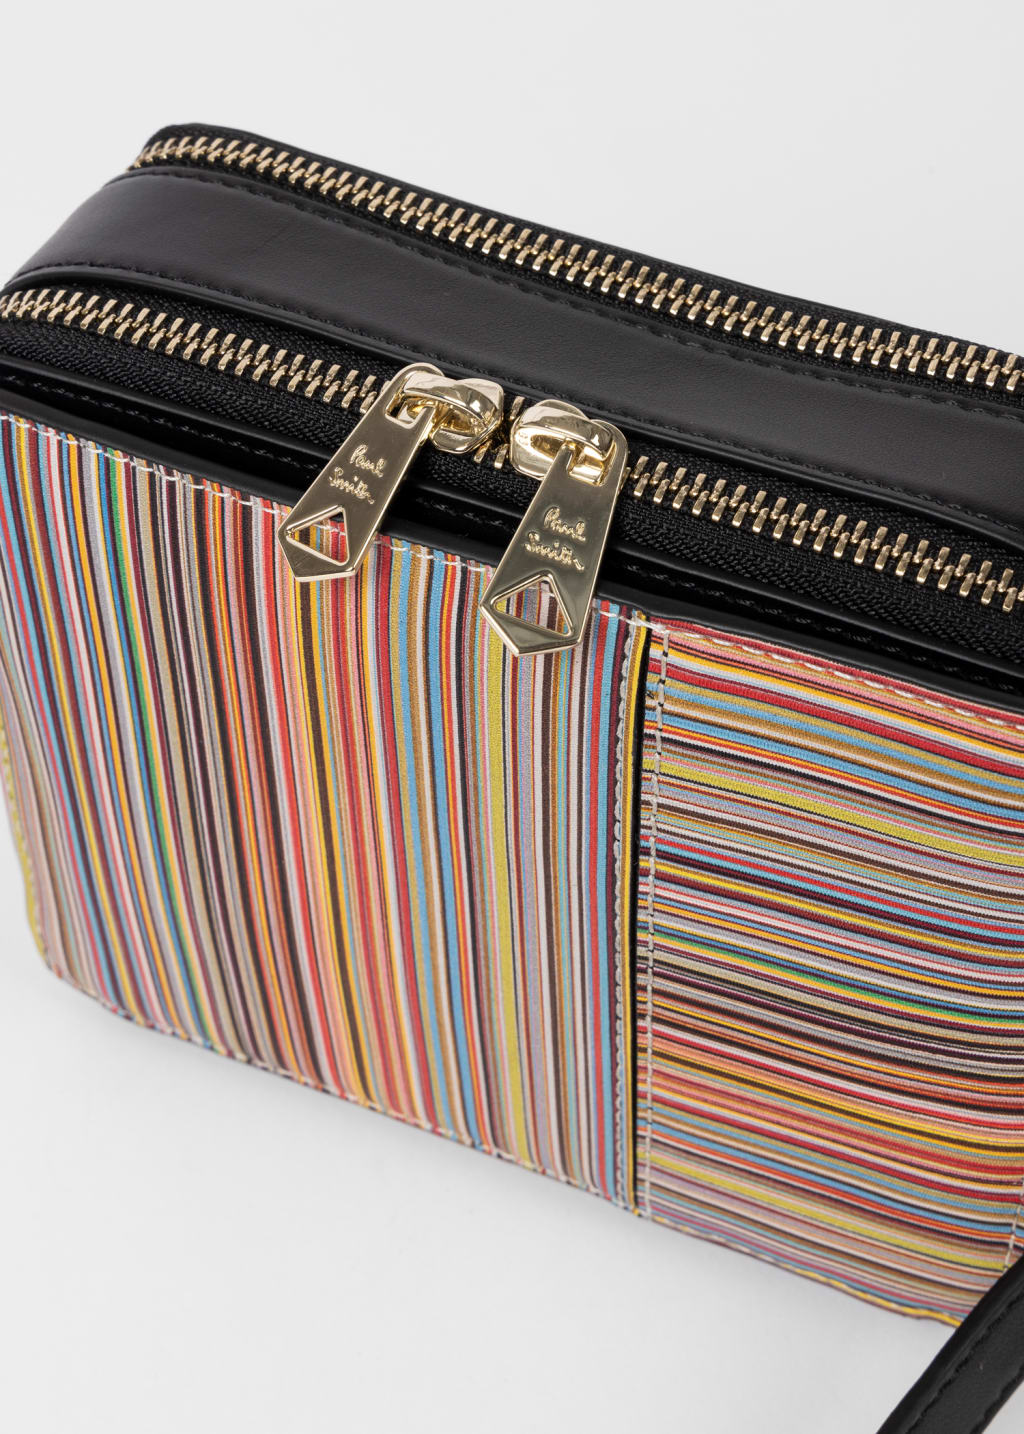 Product view - Leather 'Signature Stripe' Cross Body Bag by Paul Smith